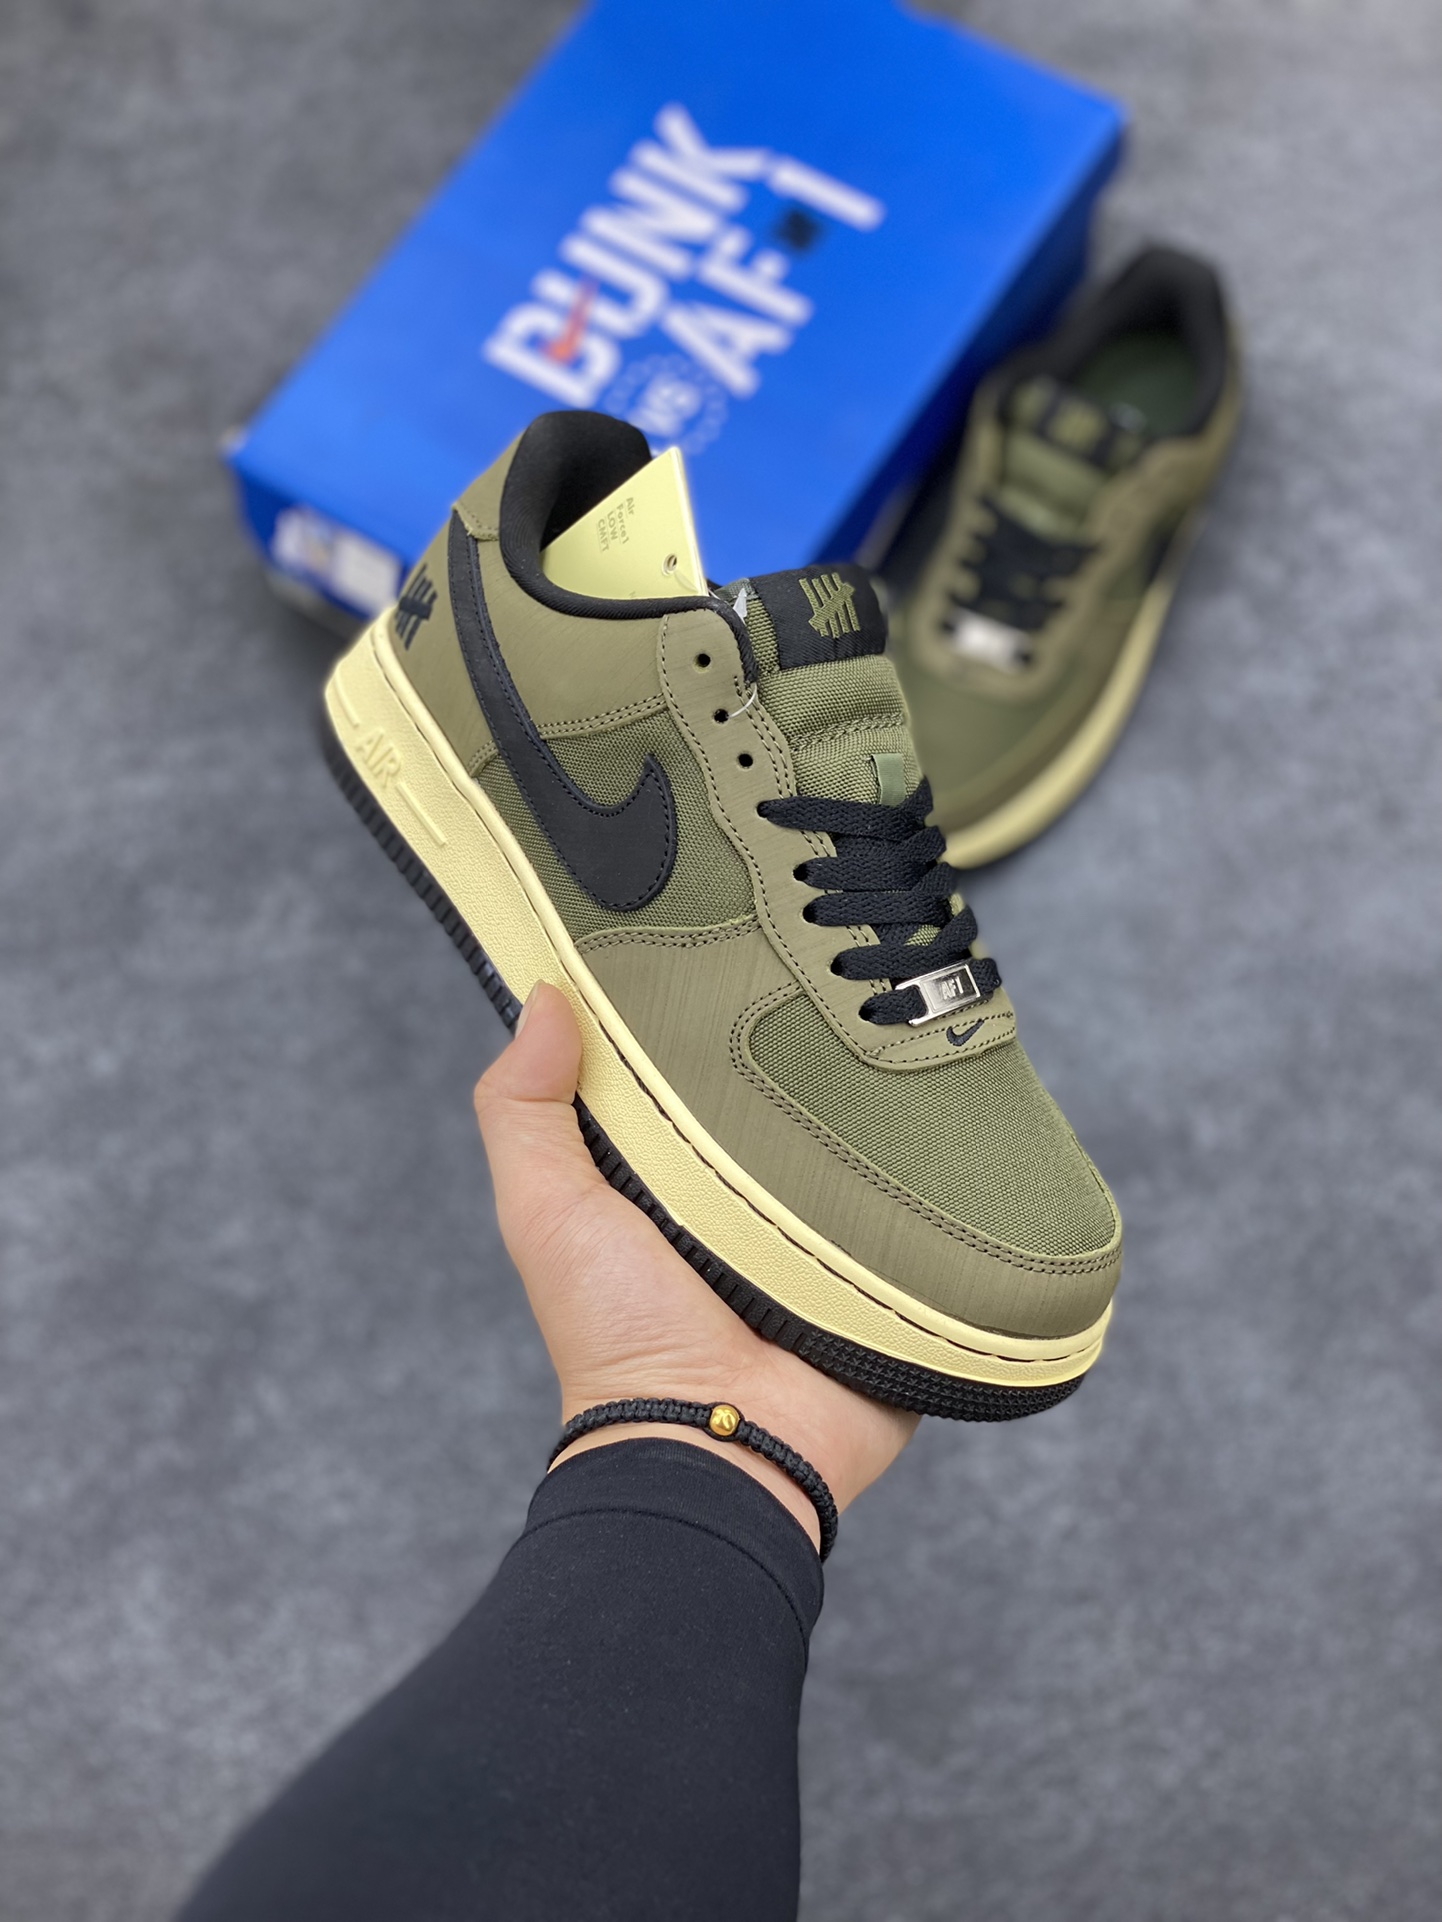 NIKE AIRFORCE Army Green Shopee Philippines | vlr.eng.br